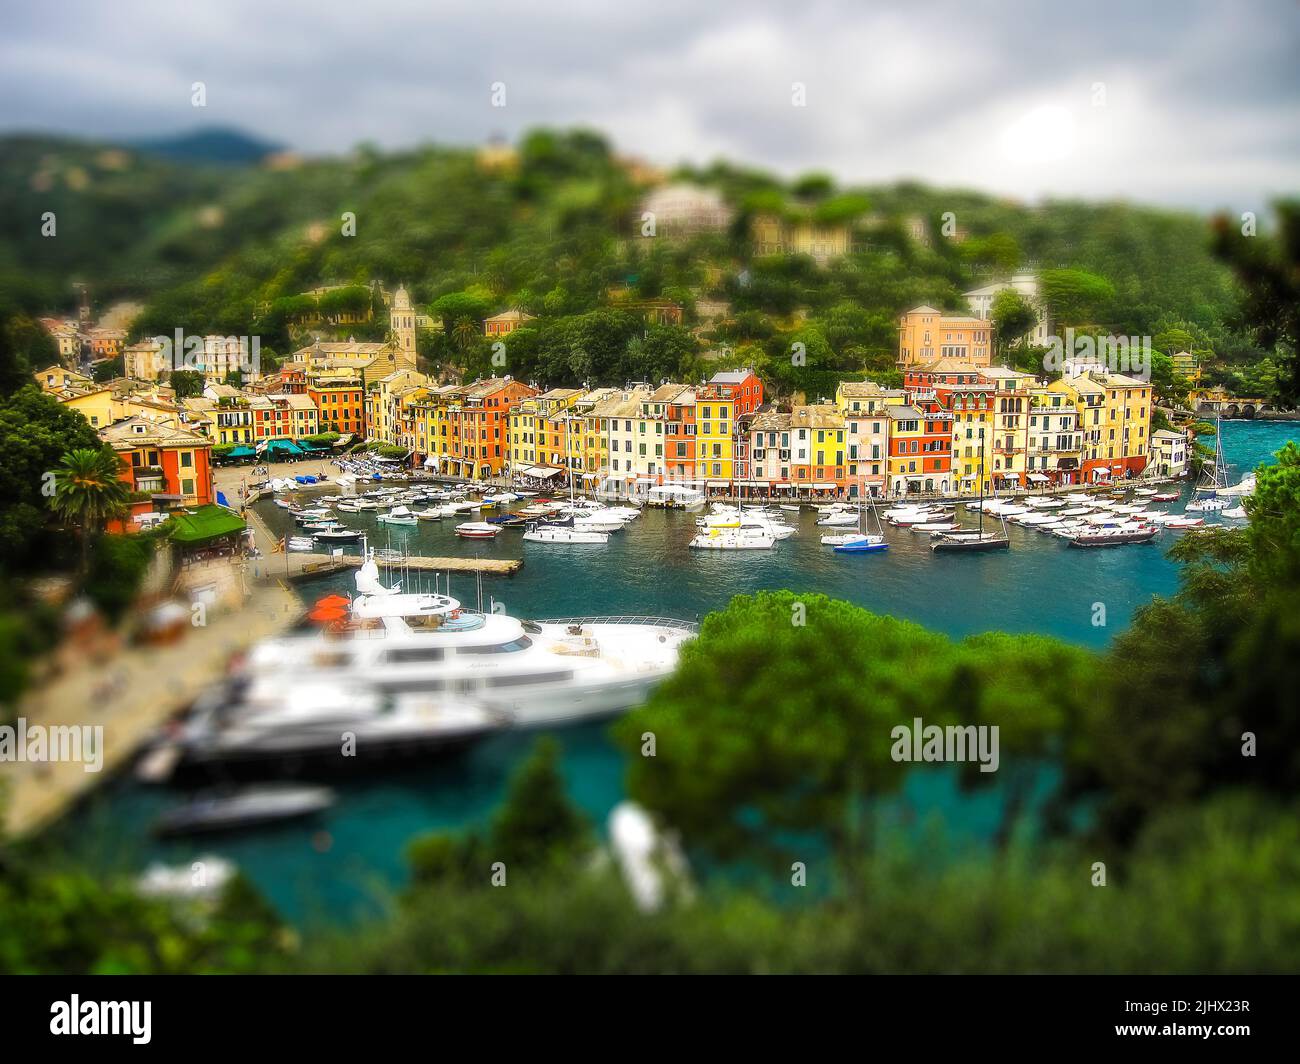 A miniature model of a scene in Portofino, Italy. Not far from the large town of Genoa. Stock Photo